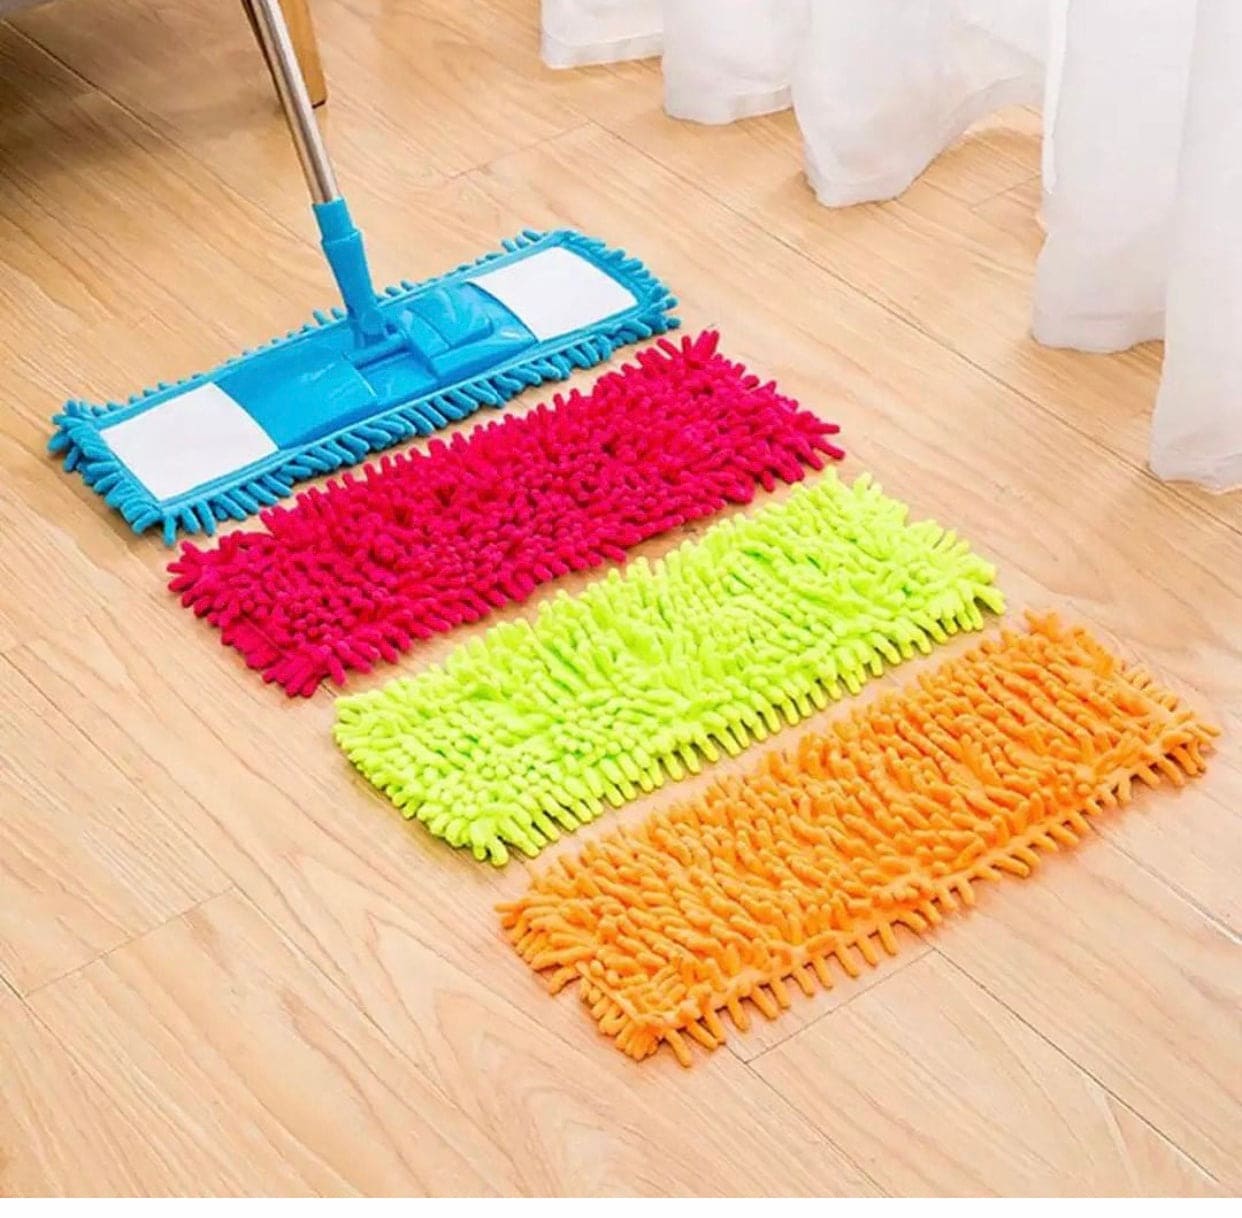 Chenille Mop Replacement Head For Floor Cleaning, Cloth Microfiber Self Wring Pads, Microfiber Mop Pads, Refill Heads for Flat Dust Mops, Floor Mop